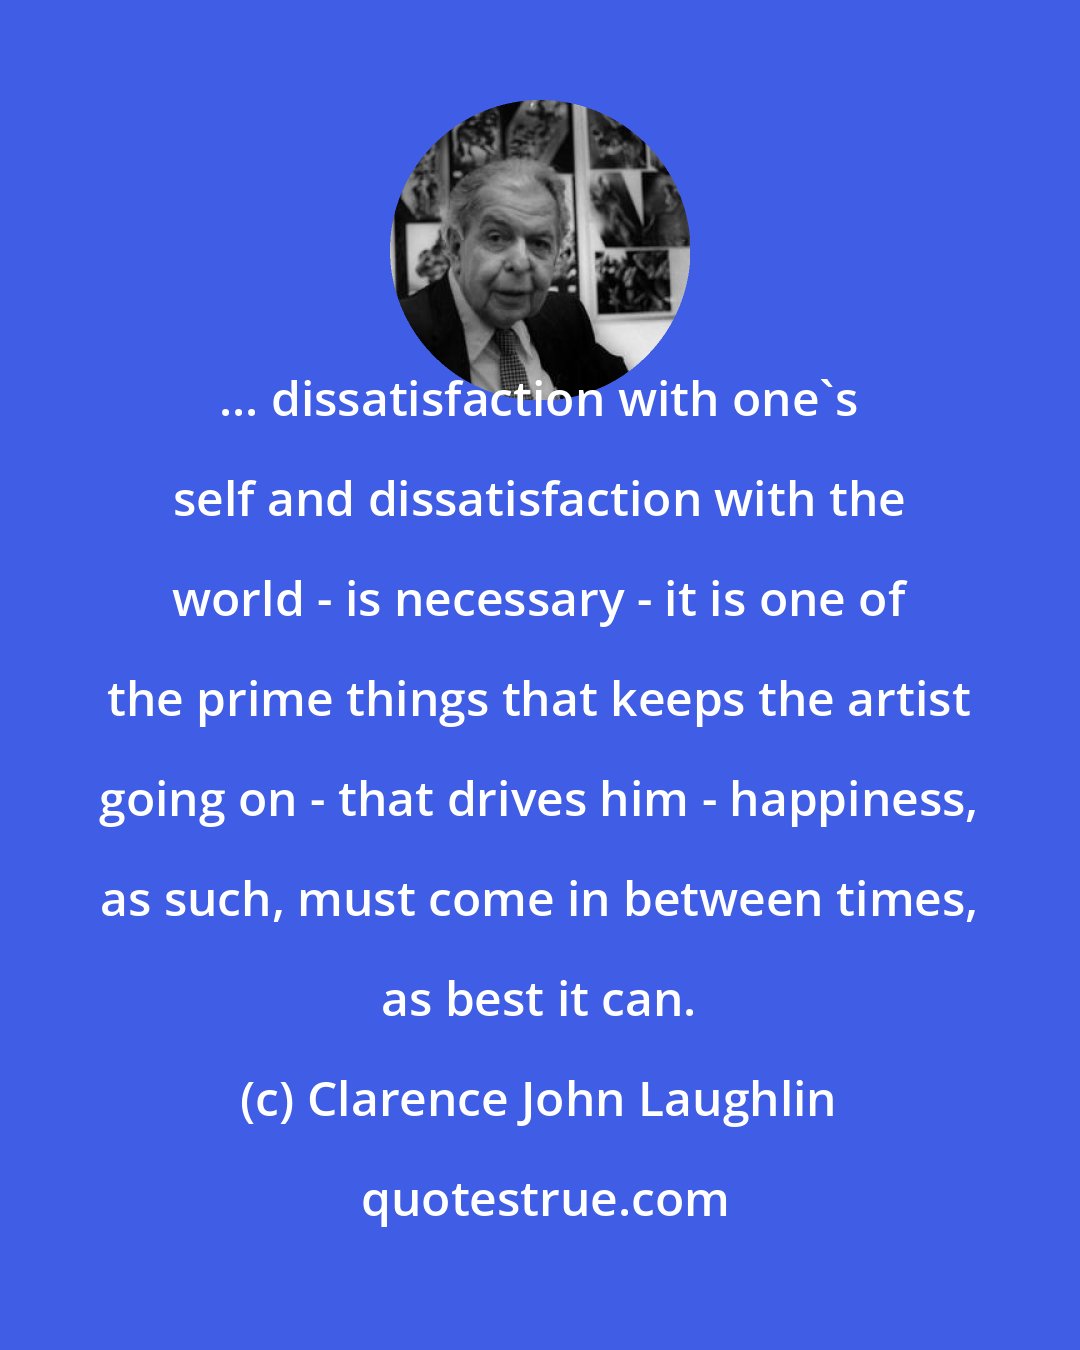 Clarence John Laughlin: ... dissatisfaction with one's self and dissatisfaction with the world - is necessary - it is one of the prime things that keeps the artist going on - that drives him - happiness, as such, must come in between times, as best it can.